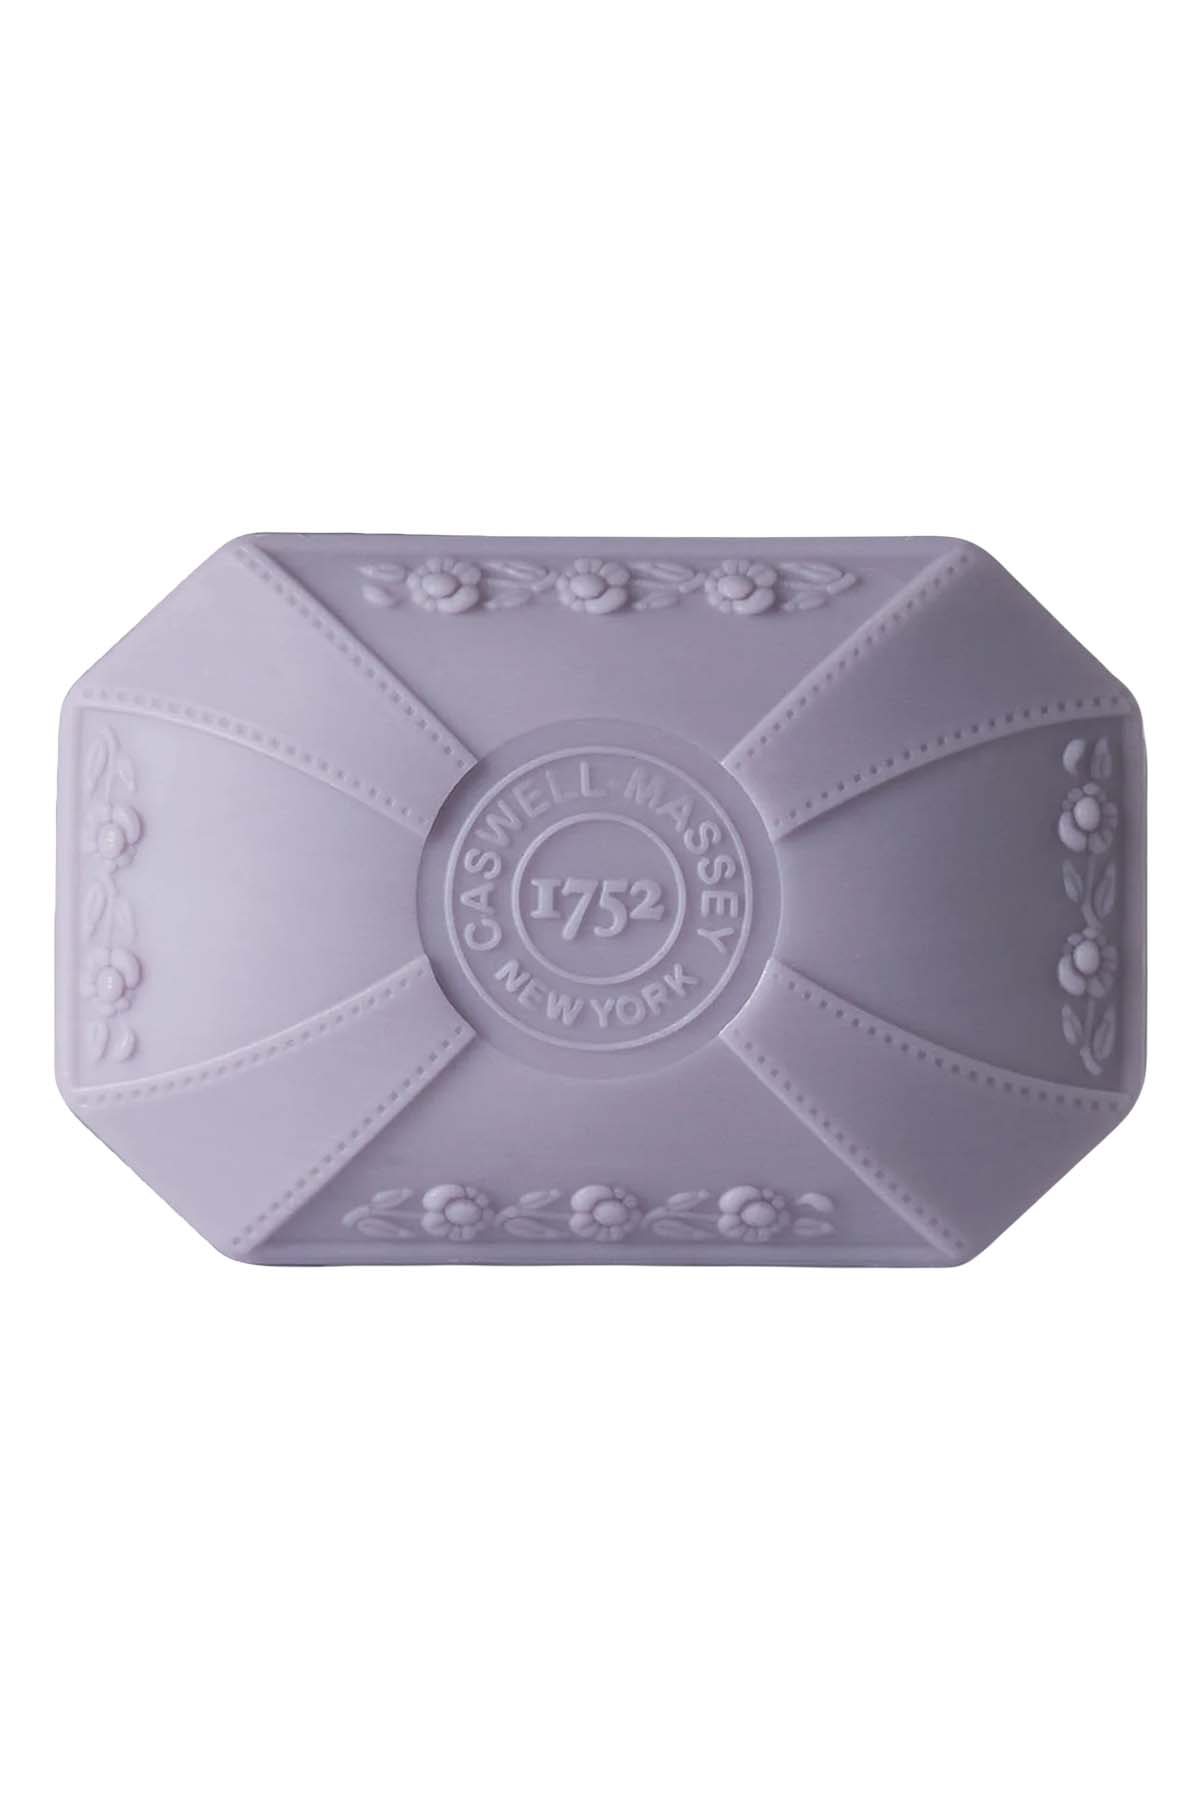 Caswell Massey Orchid Bar Soap